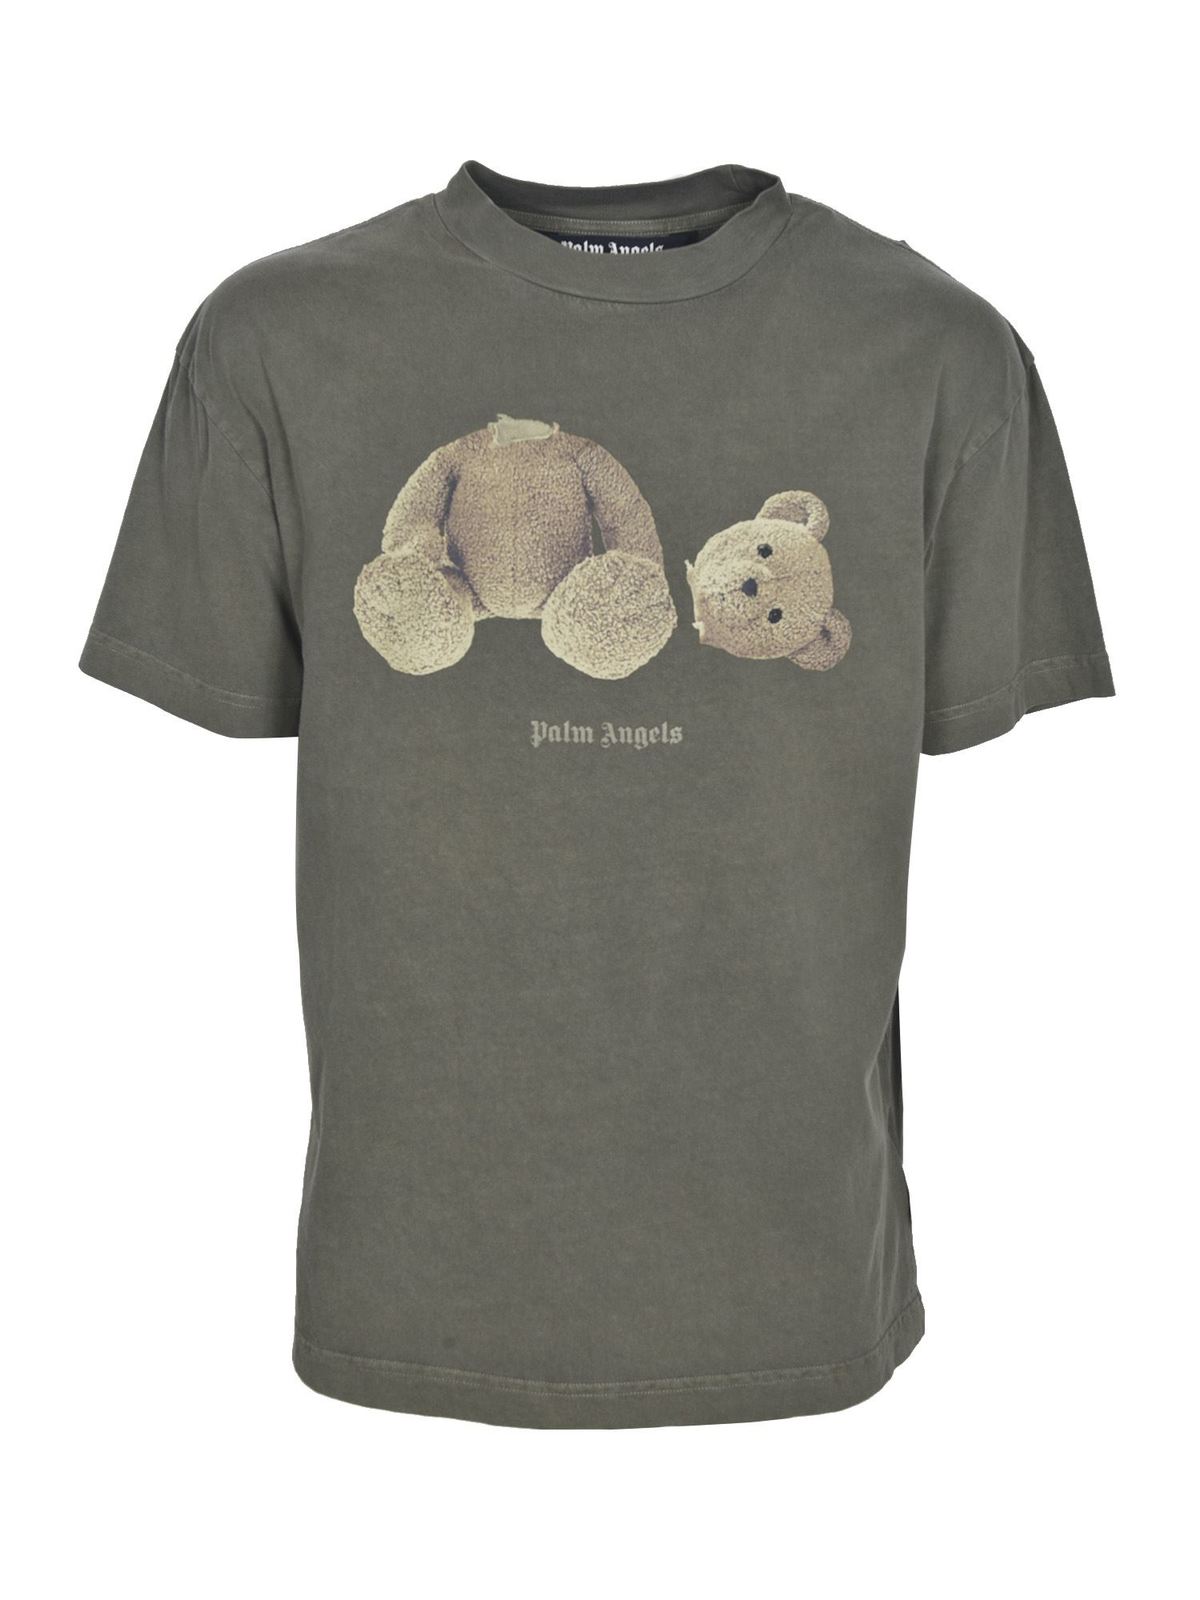 T-shirts Palm Angels - Bear t-shirt in army green - PMAA001S21JER0165601